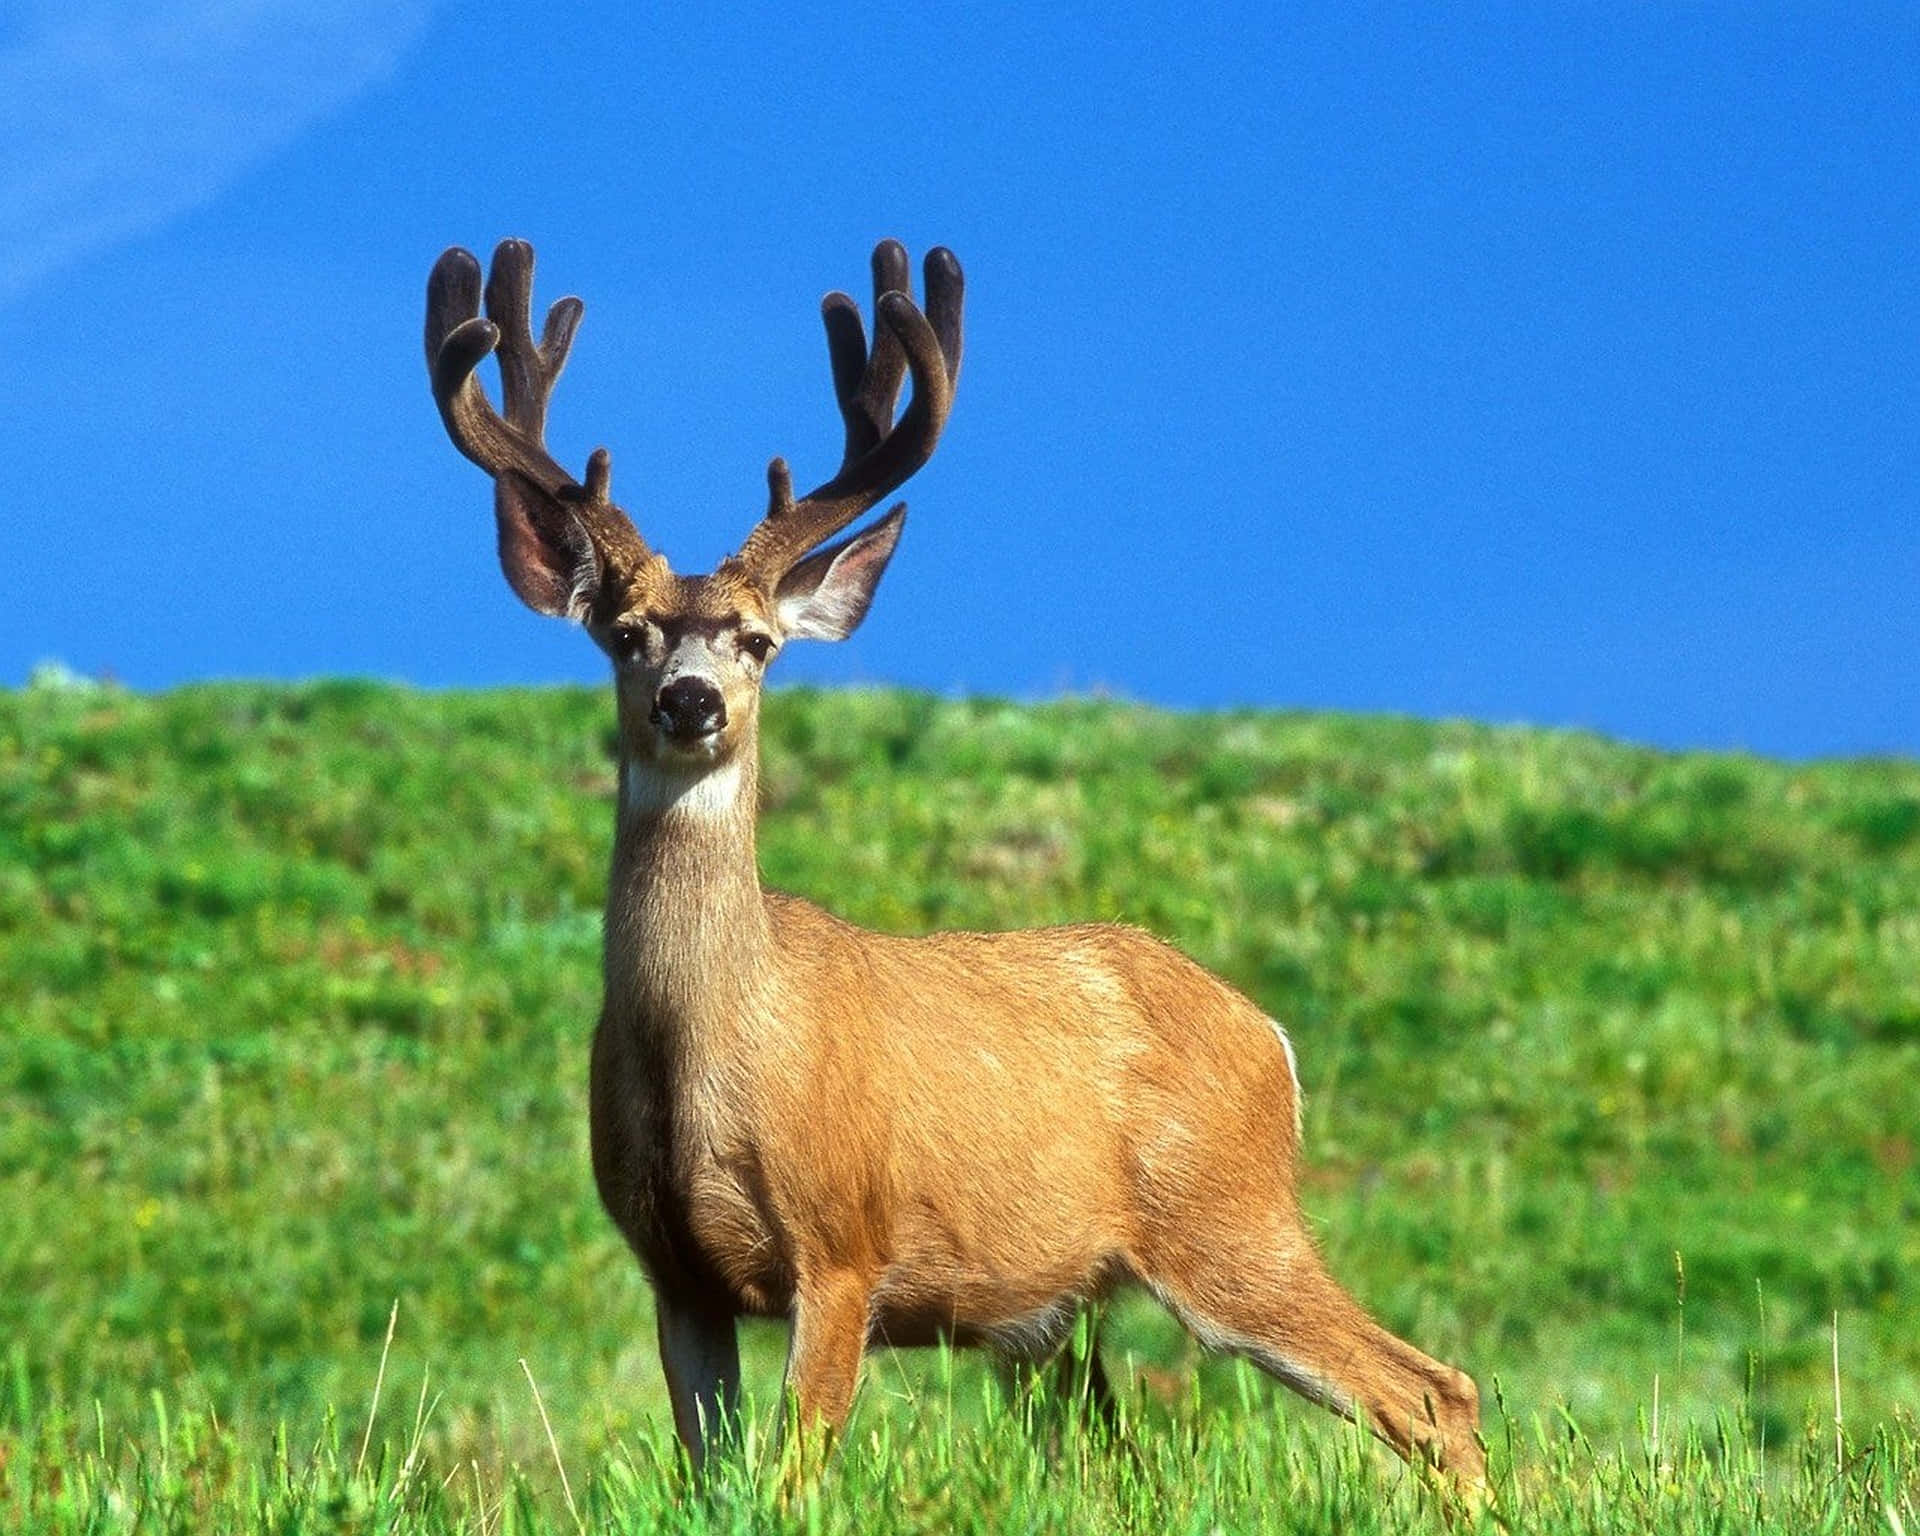 A majestic white-tailed deer enjoying the beauty of nature